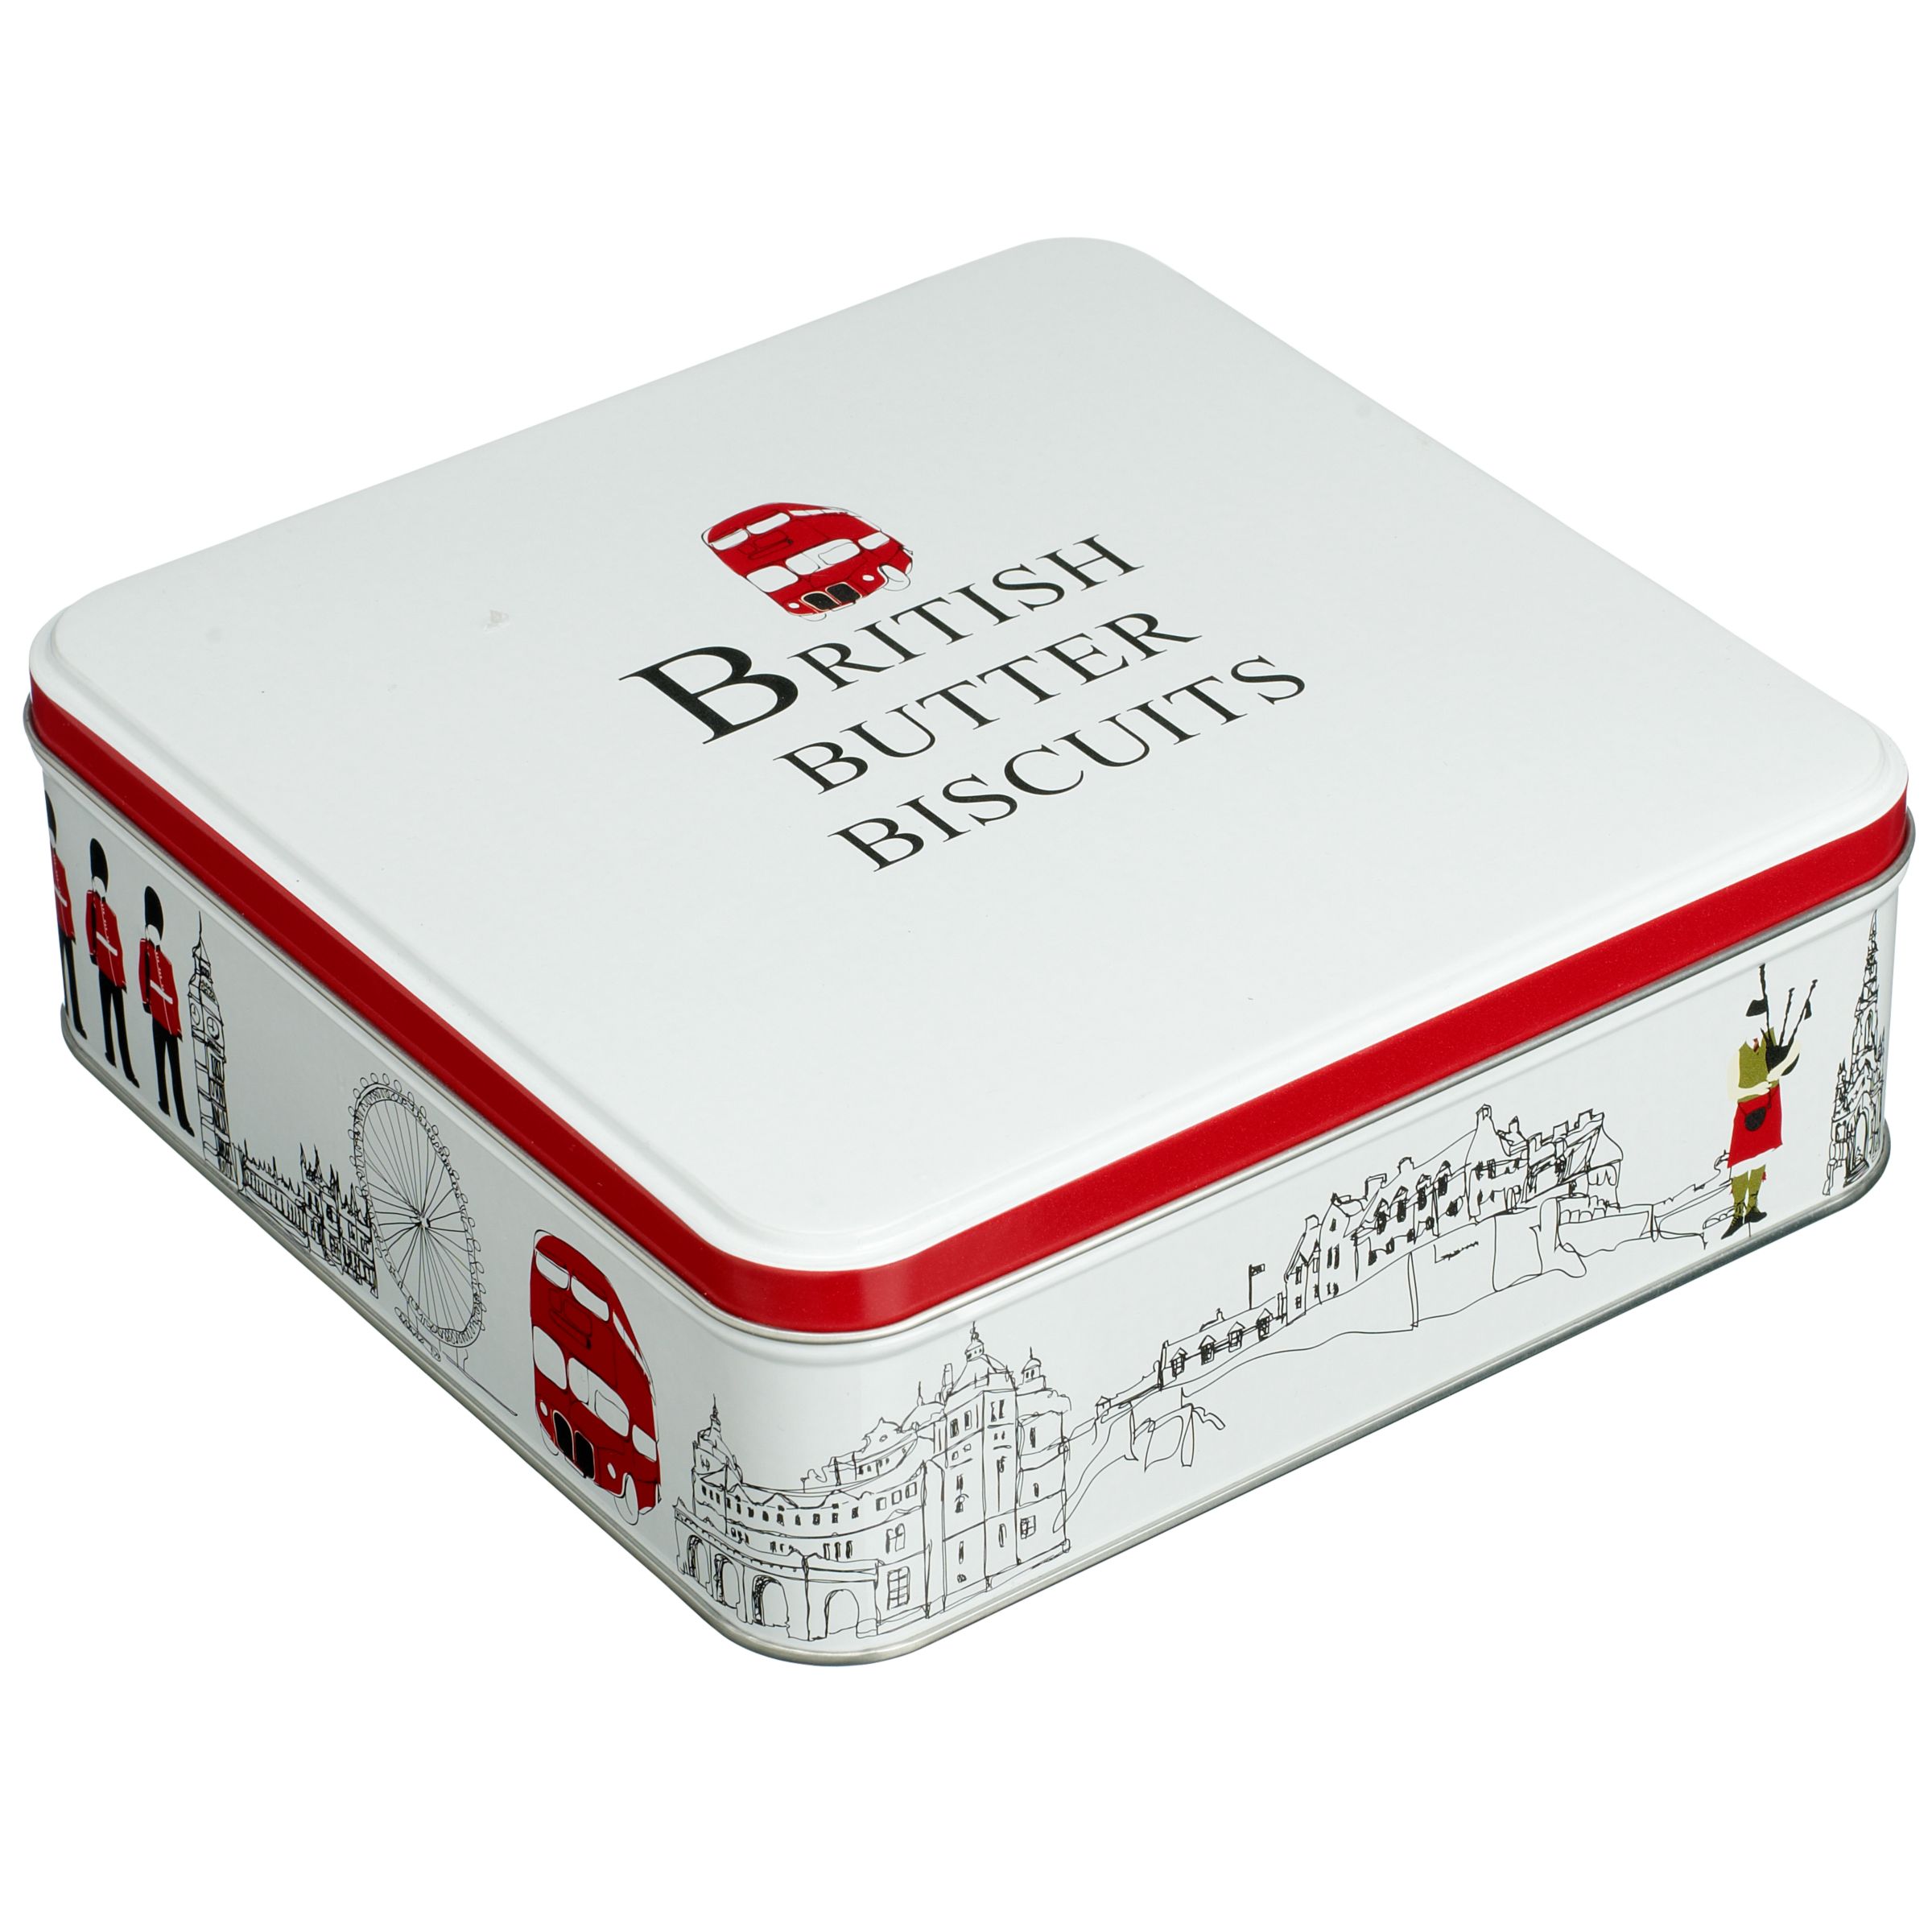 John Lewis London British Butter Biscuits in a